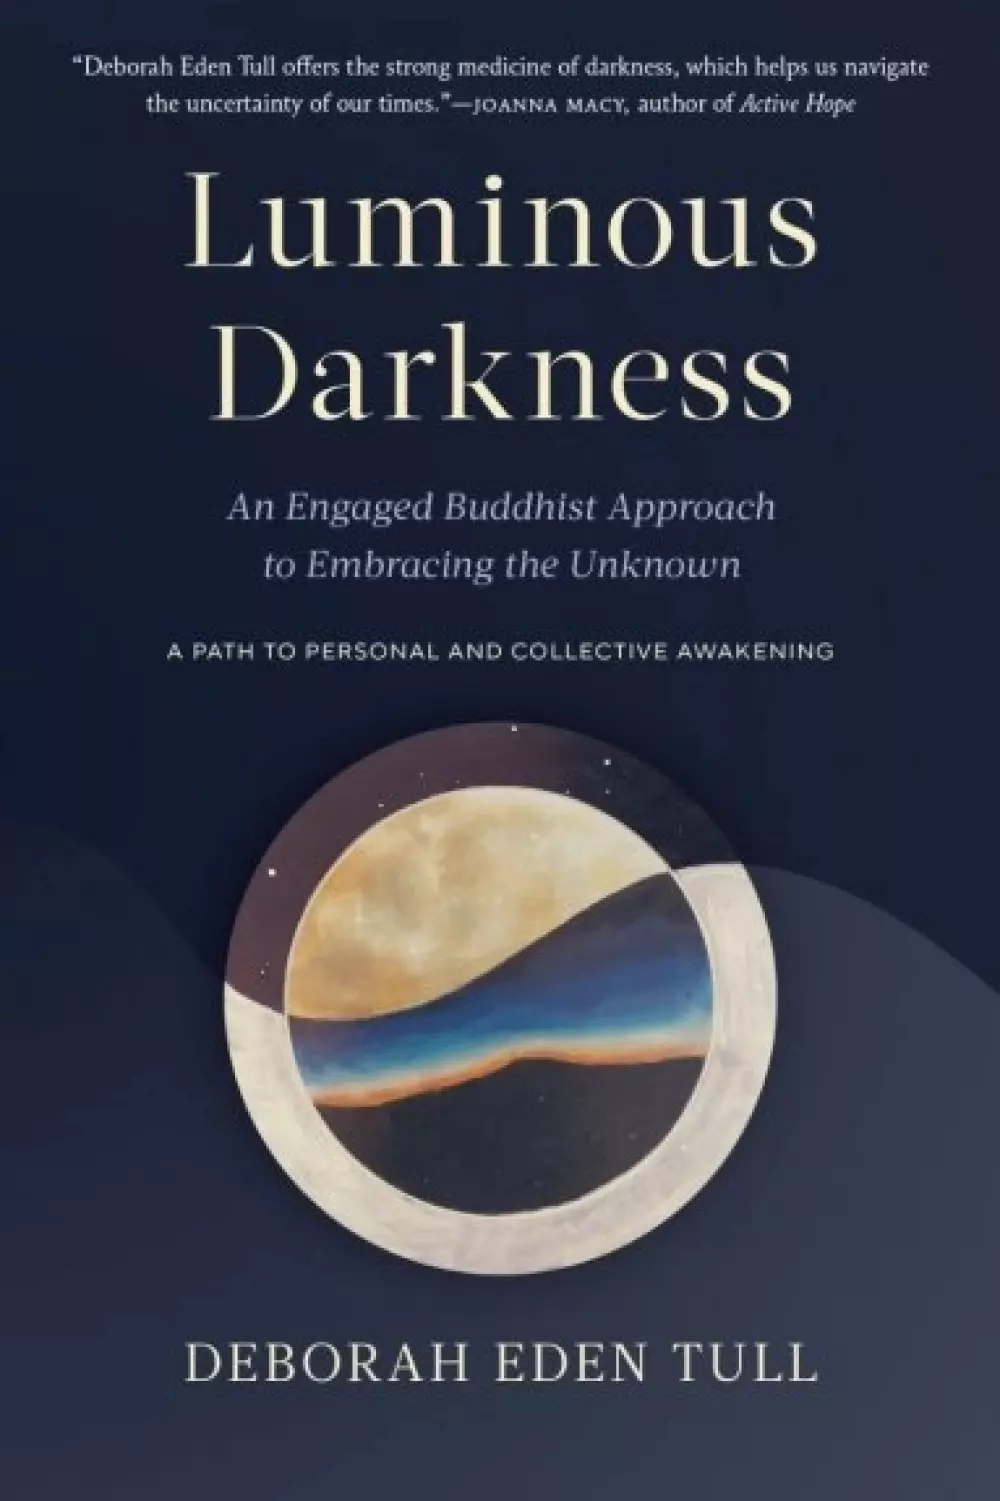 Luminous Darkness, Bøker, Filosofi & religion, An Engaged Buddhist Approach to Embracing the Unknown